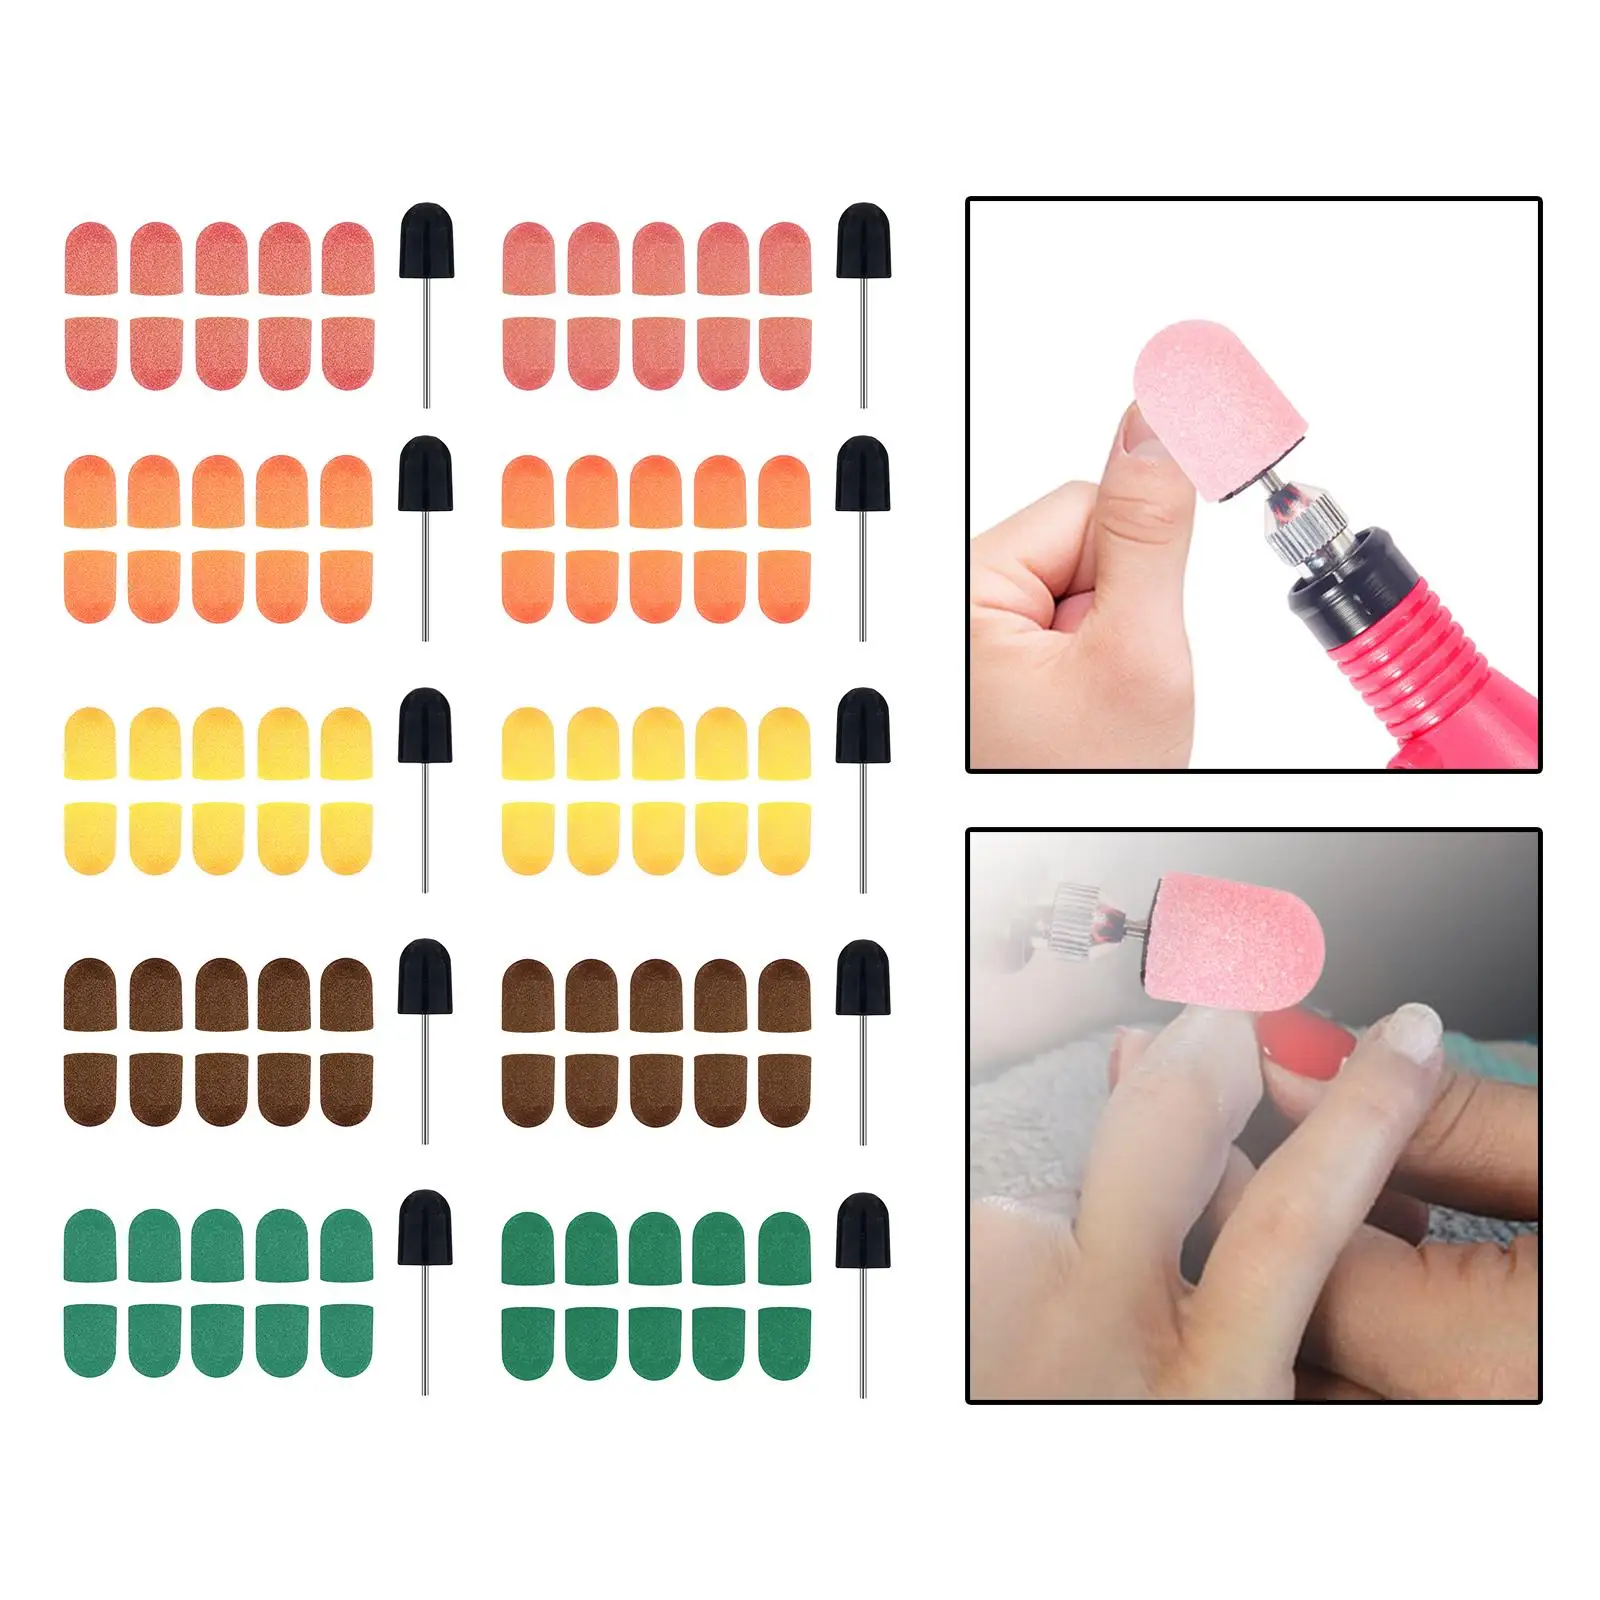 Nail Sanding Caps Bands Drill Accessories UV Gel Gel Polish Cuticle Pusher Sanding Grinding Head for Salon Home Use Nail Art